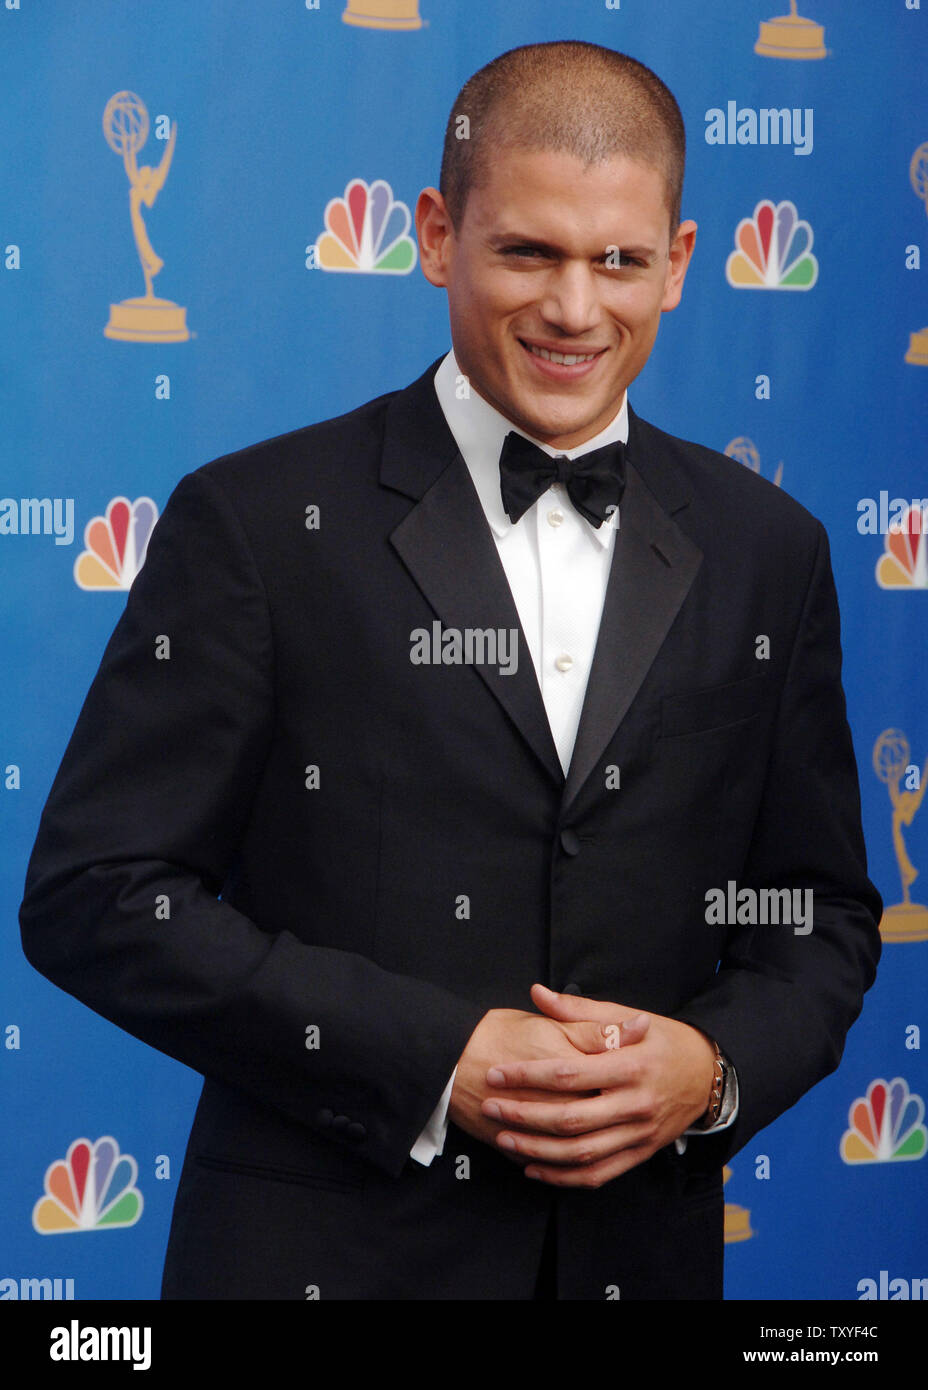 Wentworth Miller appears backstage during the 58th annual Primetime Emmy Awards at the Shrine Auditorium in Los Angeles, California on August 27, 2006. (UPI Photo/Jim Ruymen) Stock Photo